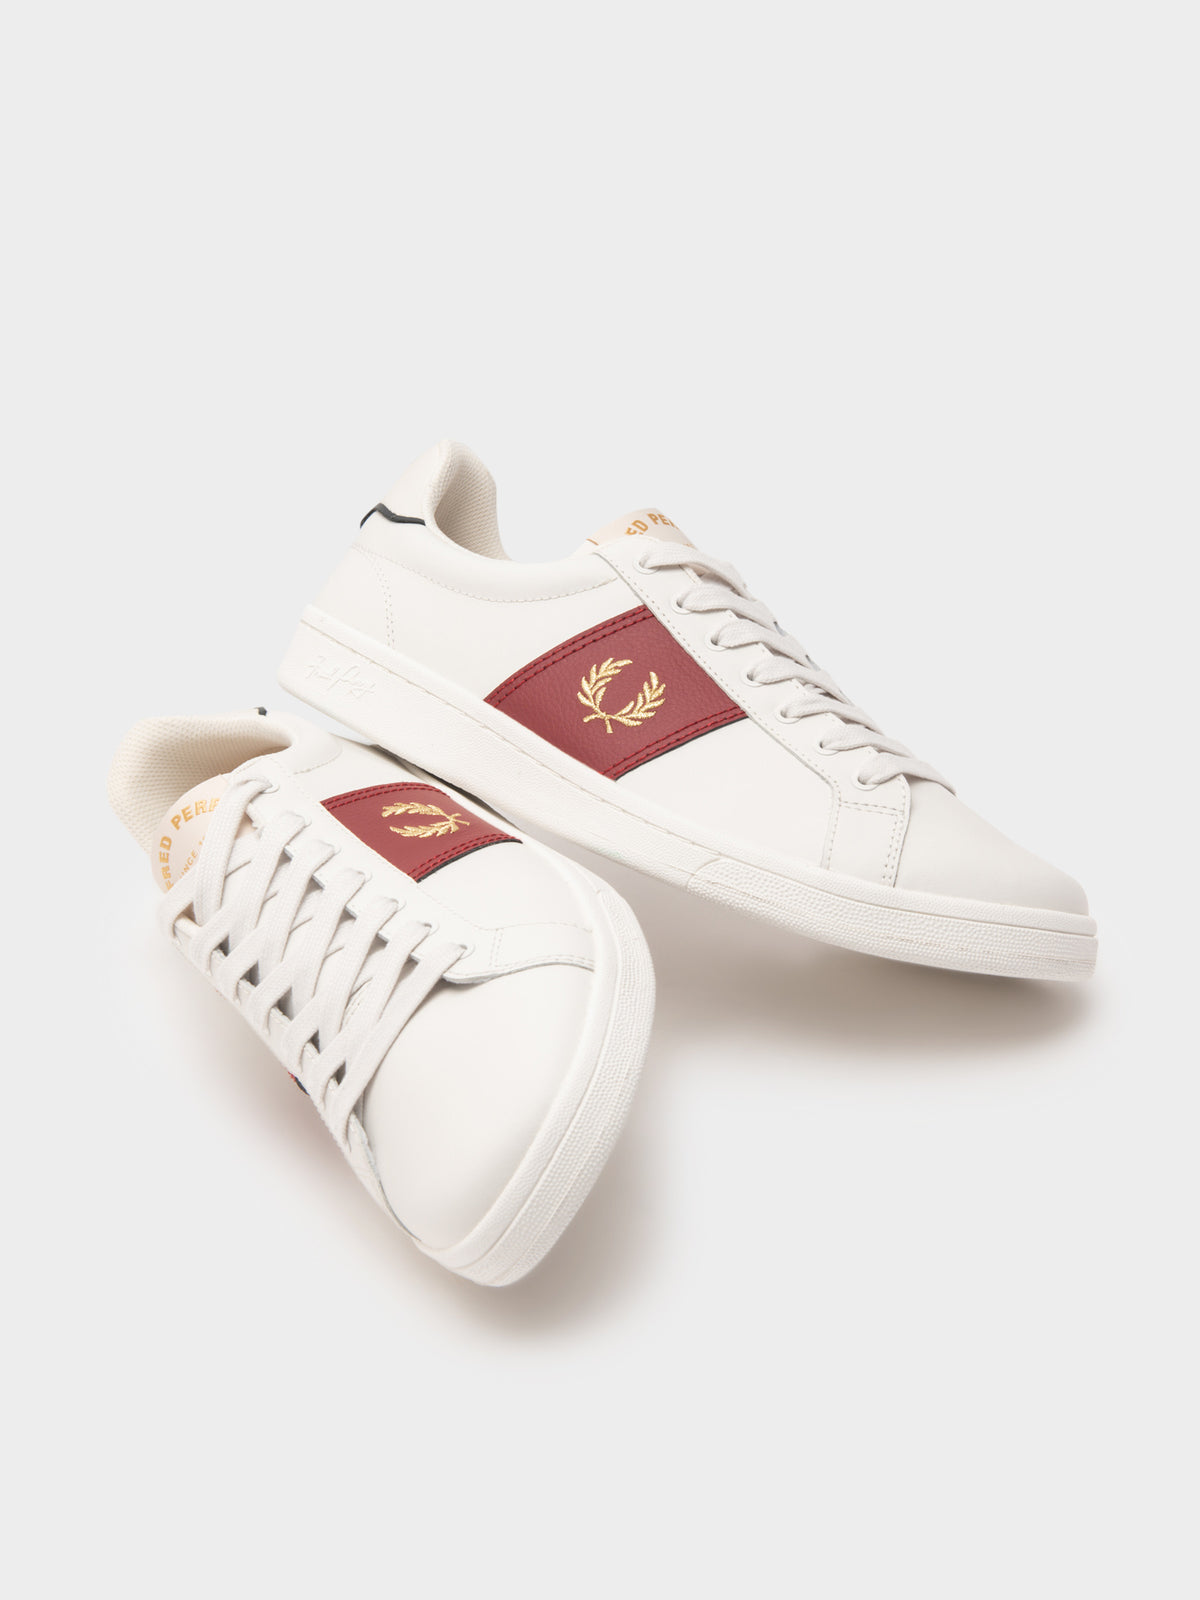 B721 Gold Detail Leather Sneaker in White